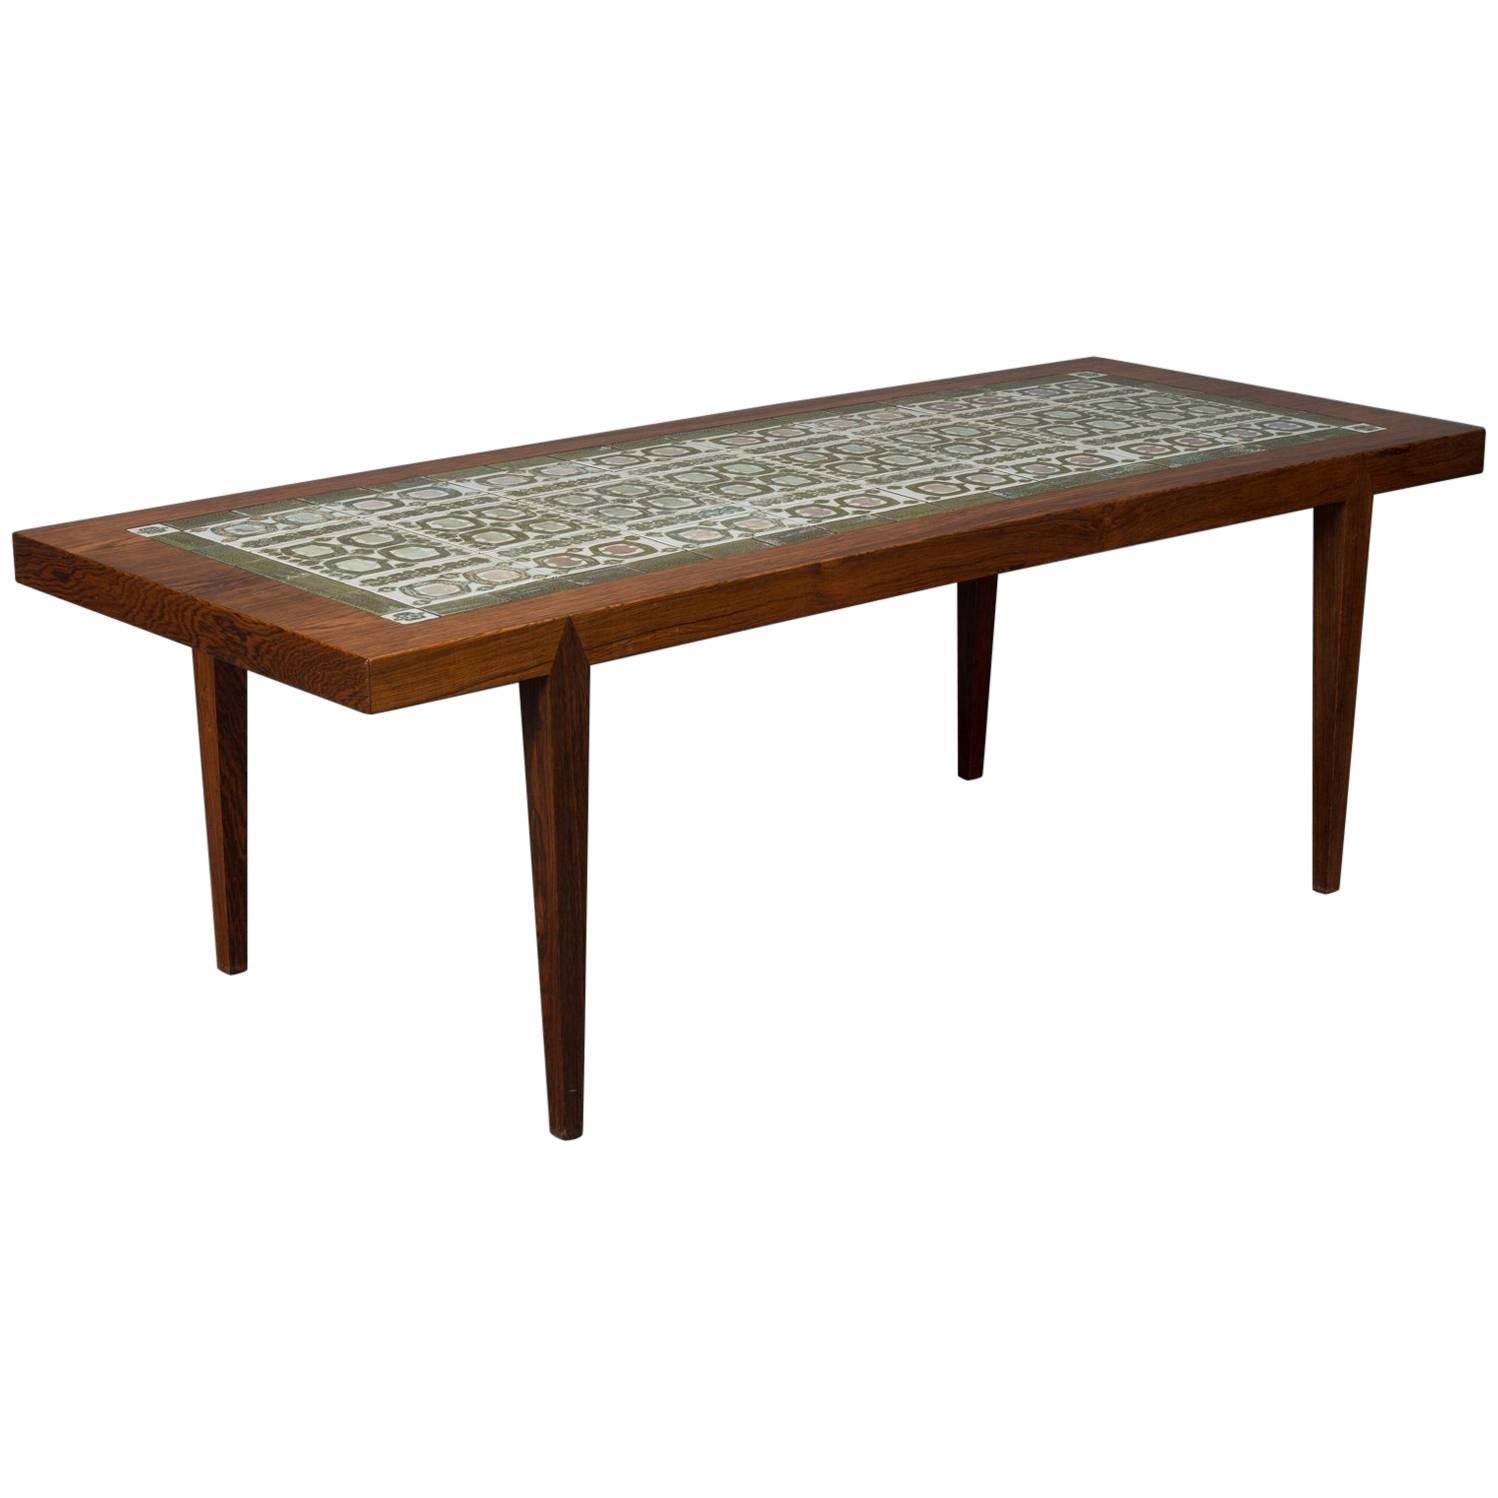 Rosewood and Green Tile Coffee Table